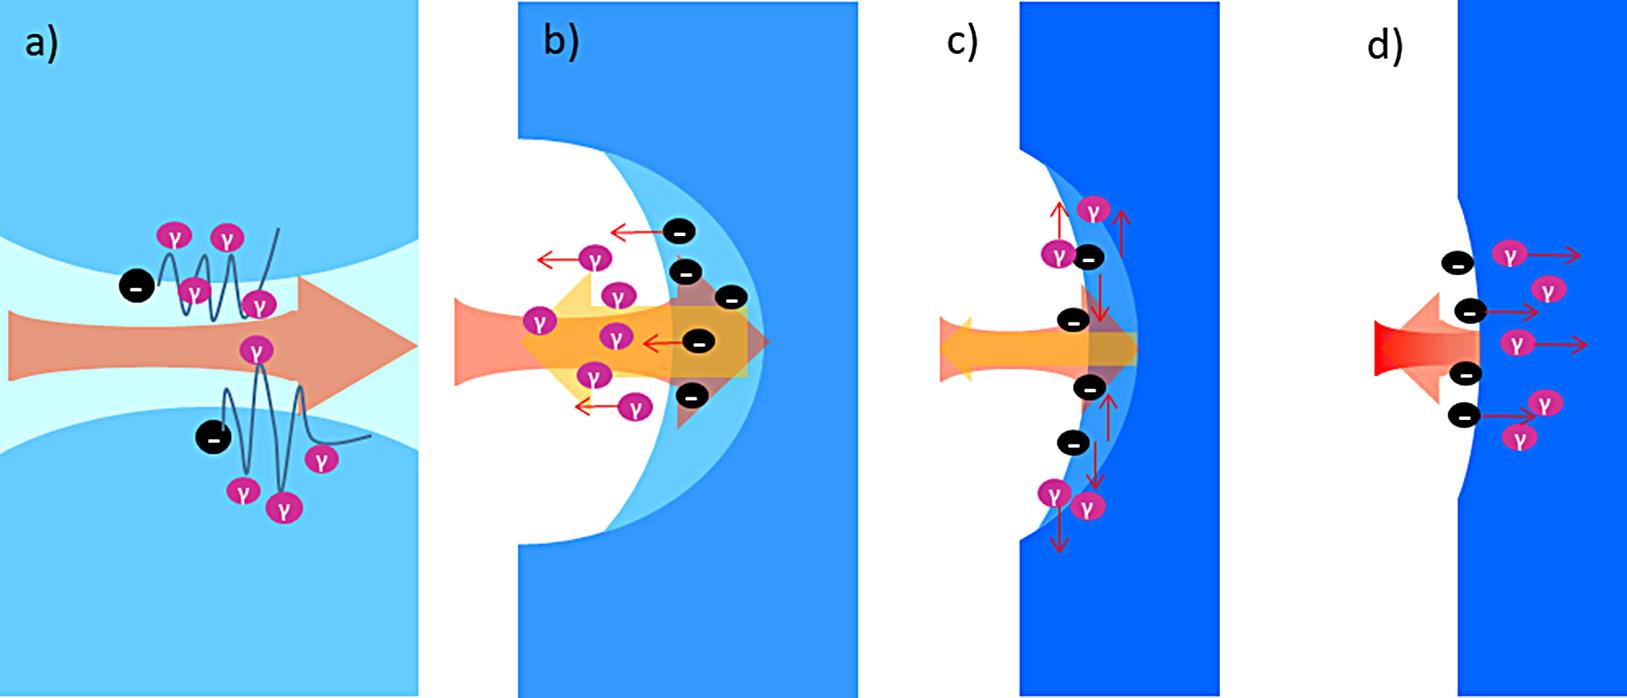 Schematic of traditional γ-ray generation mechanisms at uniform plasma with different density (blue backgrounds represent plasma densities; black circles are electrons; purple represents the gamma photons; small red arrows show the moving direction of the electrons and gamma photons; light red arrows are the laser; and yellow arrows are the space charge force). (a) Low-density plasma nenc, forming a plasma channel. (b) Plasma density is close to the penetration threshold value nenth, showing the RESE process. (c) Transition region with nth<ne<nc* of the TOEE mechanism. (d) High density of ne>nc* of the SDE process.